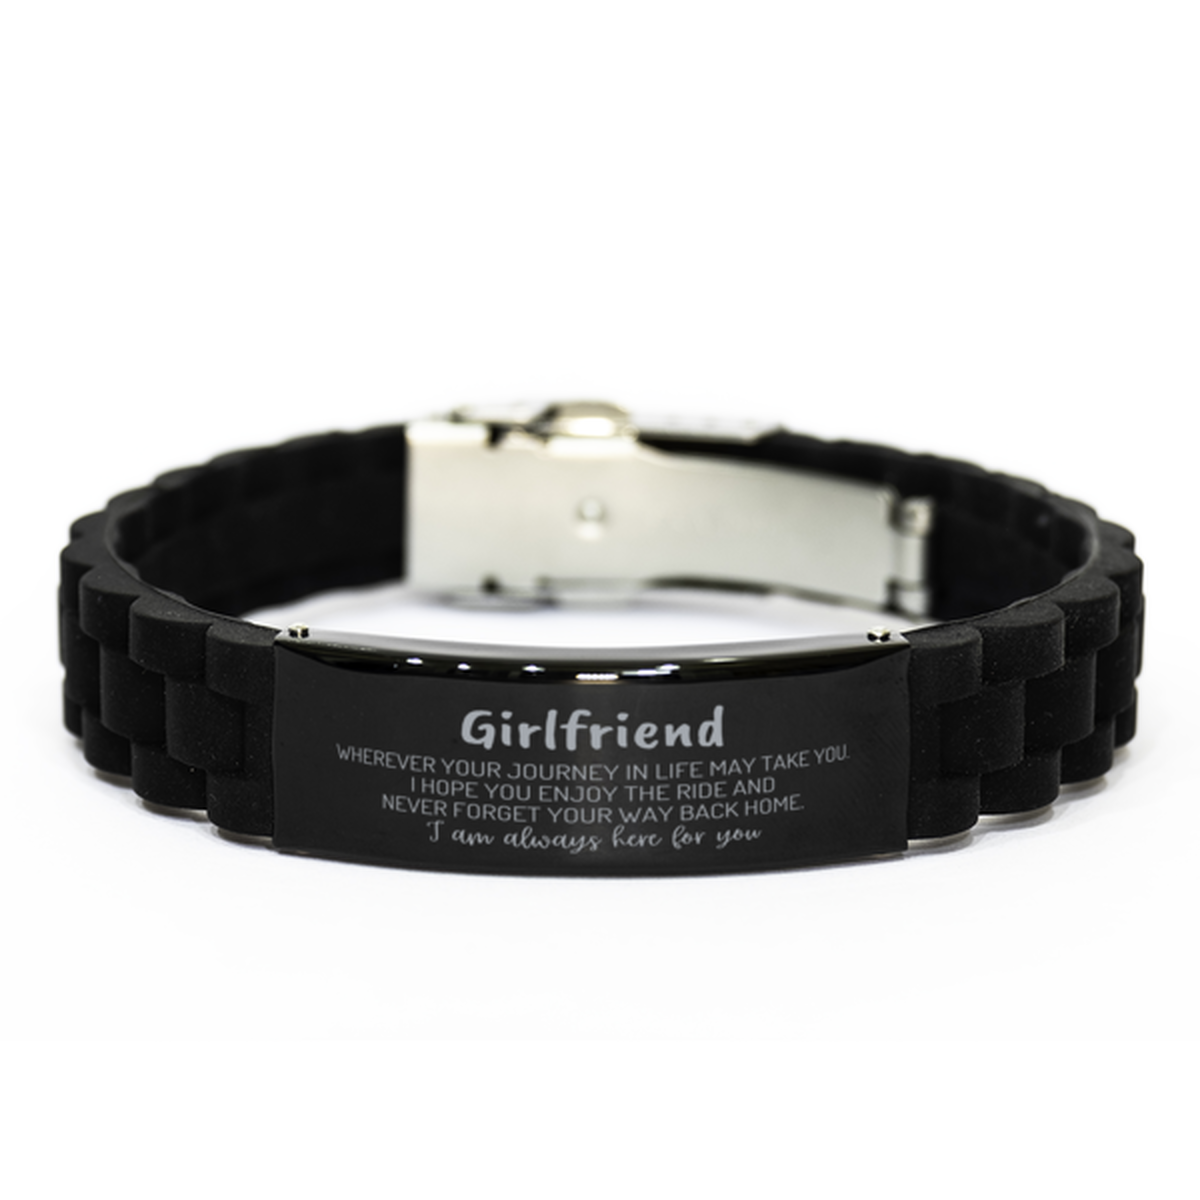 Girlfriend wherever your journey in life may take you, I am always here for you Girlfriend Black Glidelock Clasp Bracelet, Awesome Christmas Gifts For Girlfriend, Girlfriend Birthday Gifts for Men Women Family Loved One